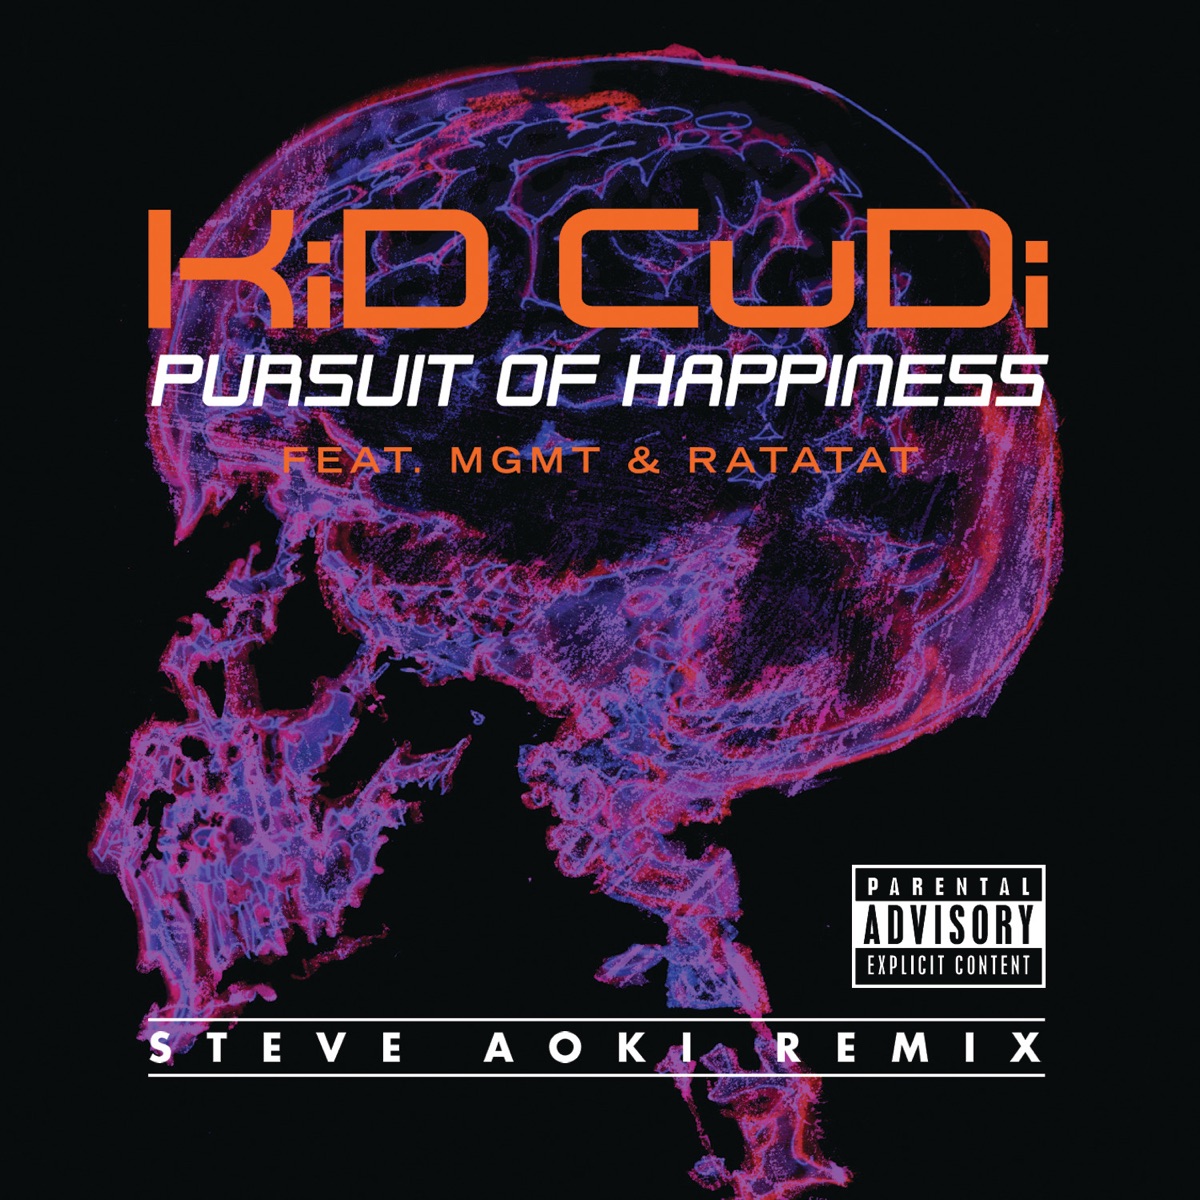 Pursuit of Happiness (feat. MGMT & Ratatat) [Extended Steve Aoki Remix] -  Single by Kid Cudi on Apple Music